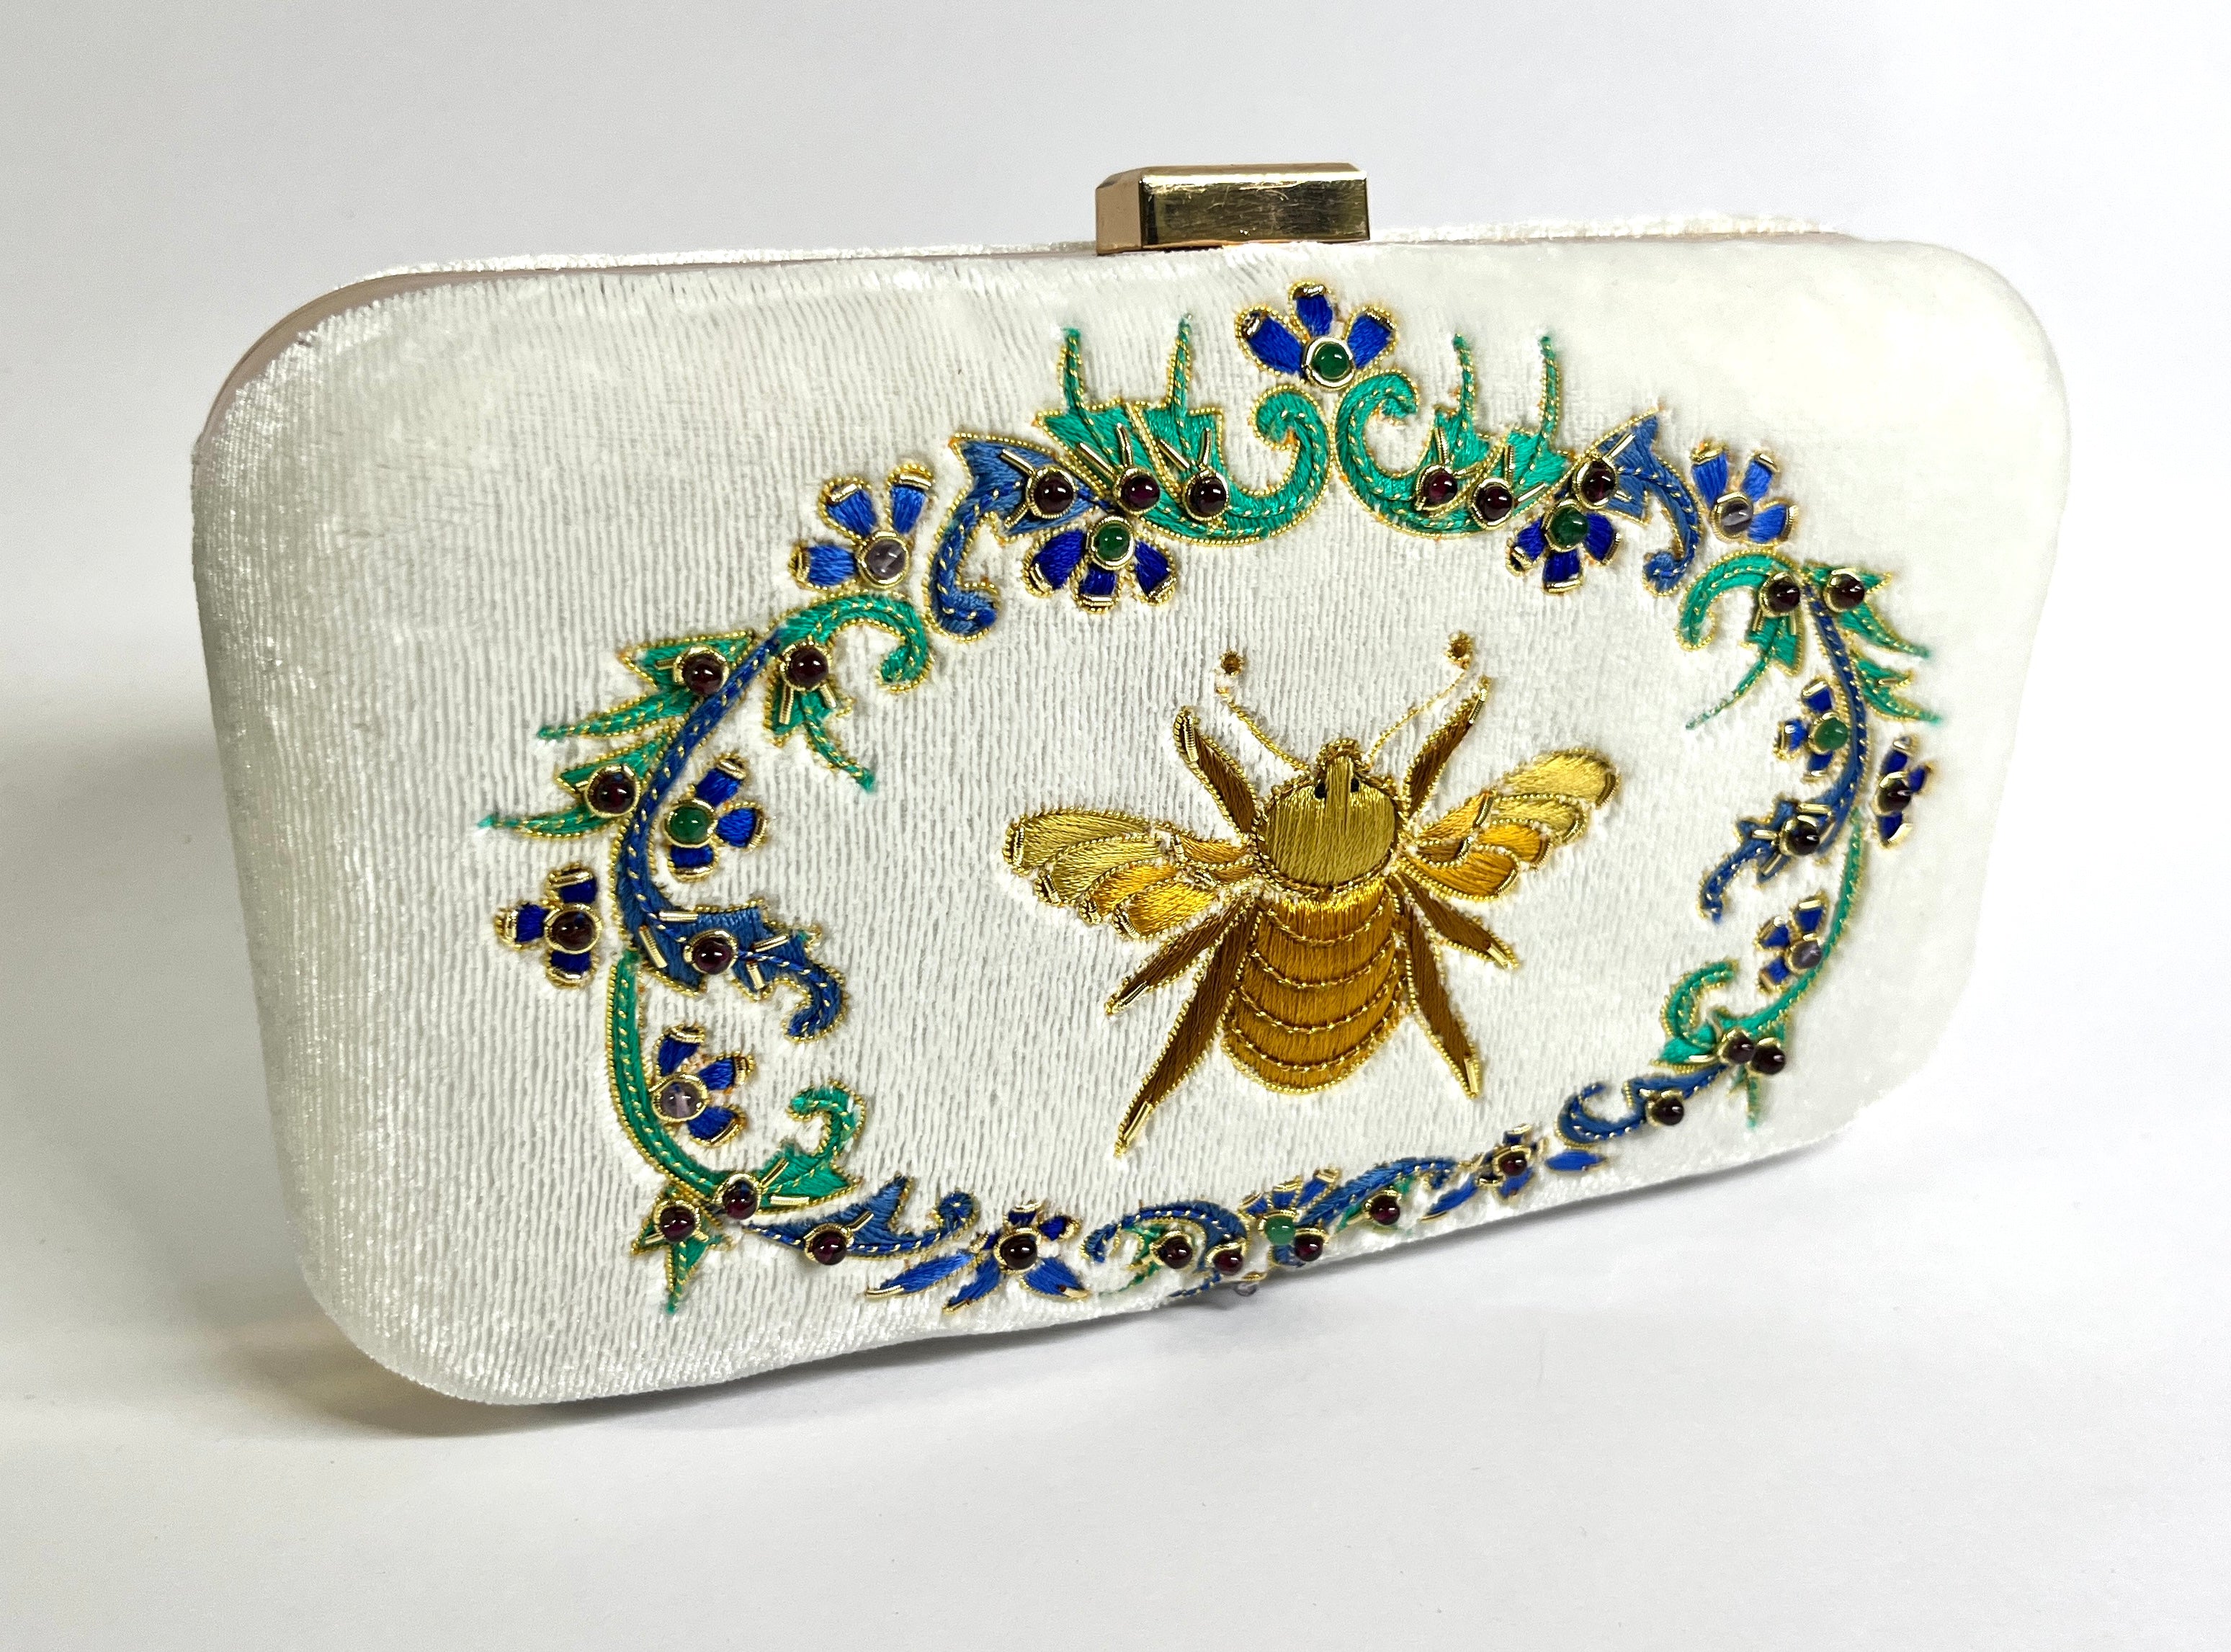 WHITE VELVET BOX CLUTCH WITH SILK EMBROIDERY OF QUEEN BEE